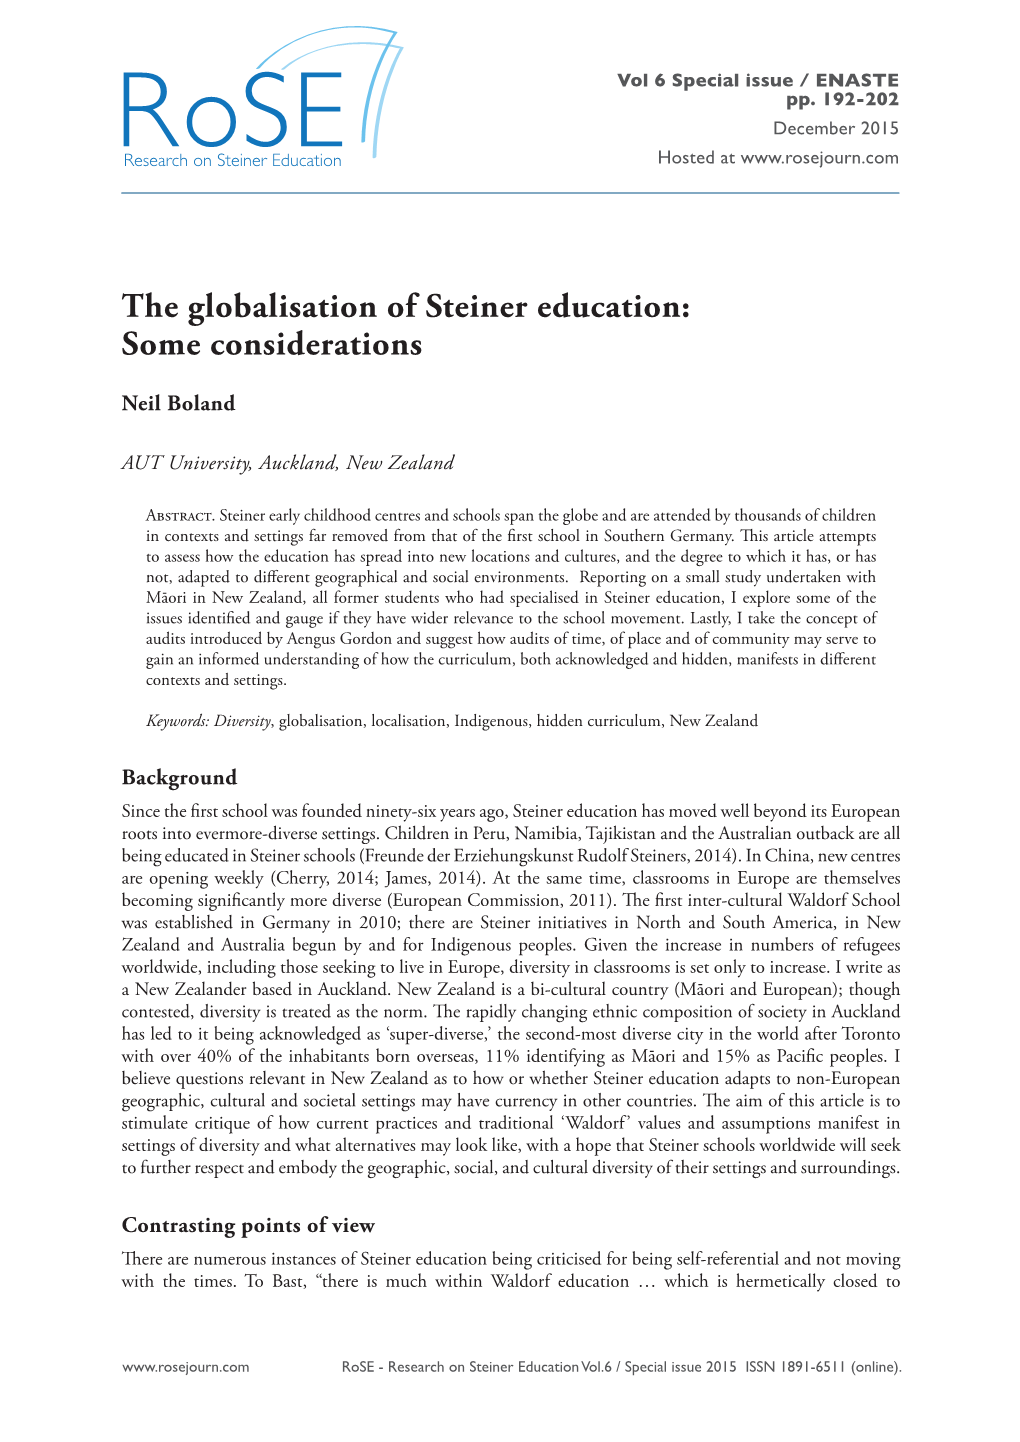 The Globalisation of Steiner Education: Some Considerations